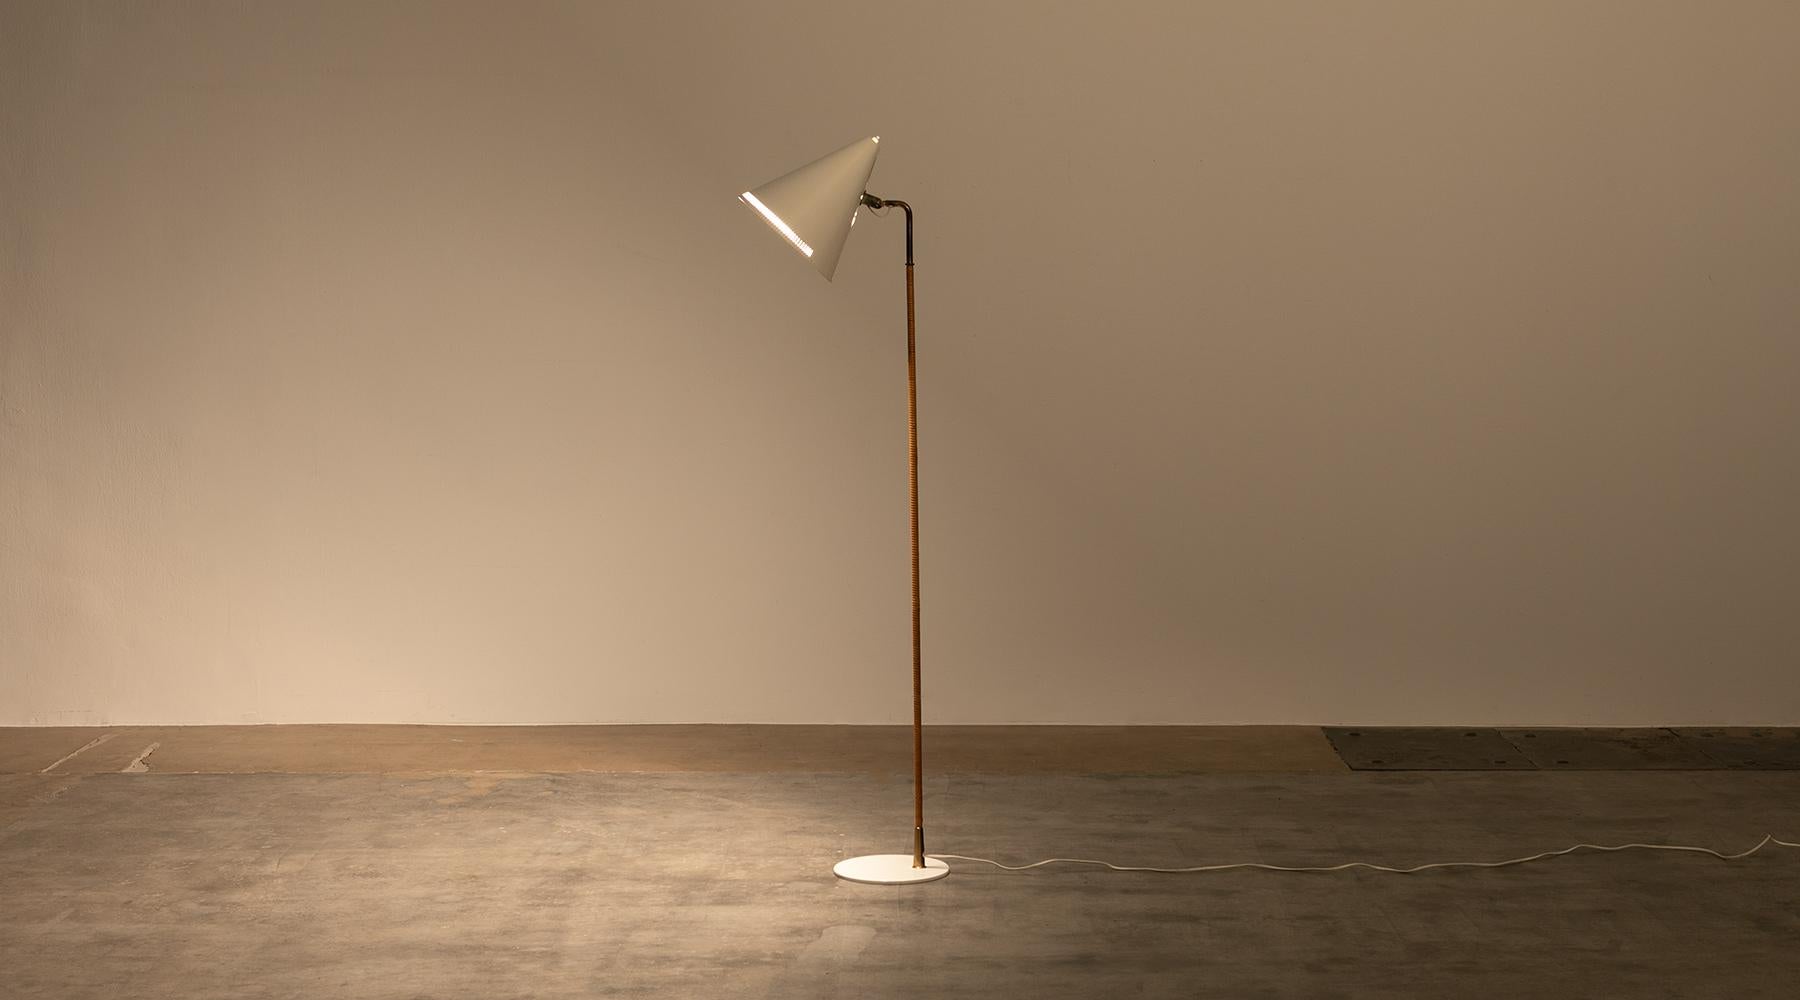 White lacquered and brass and wicker floor lamp by Paavo Tynell, Finland, 1957.

Very elegant floor lamp designed by famous Finnish Paavo Tynell giving a warm charming light. The white lacquered shade is adjustable, the stem is covered in wicker.